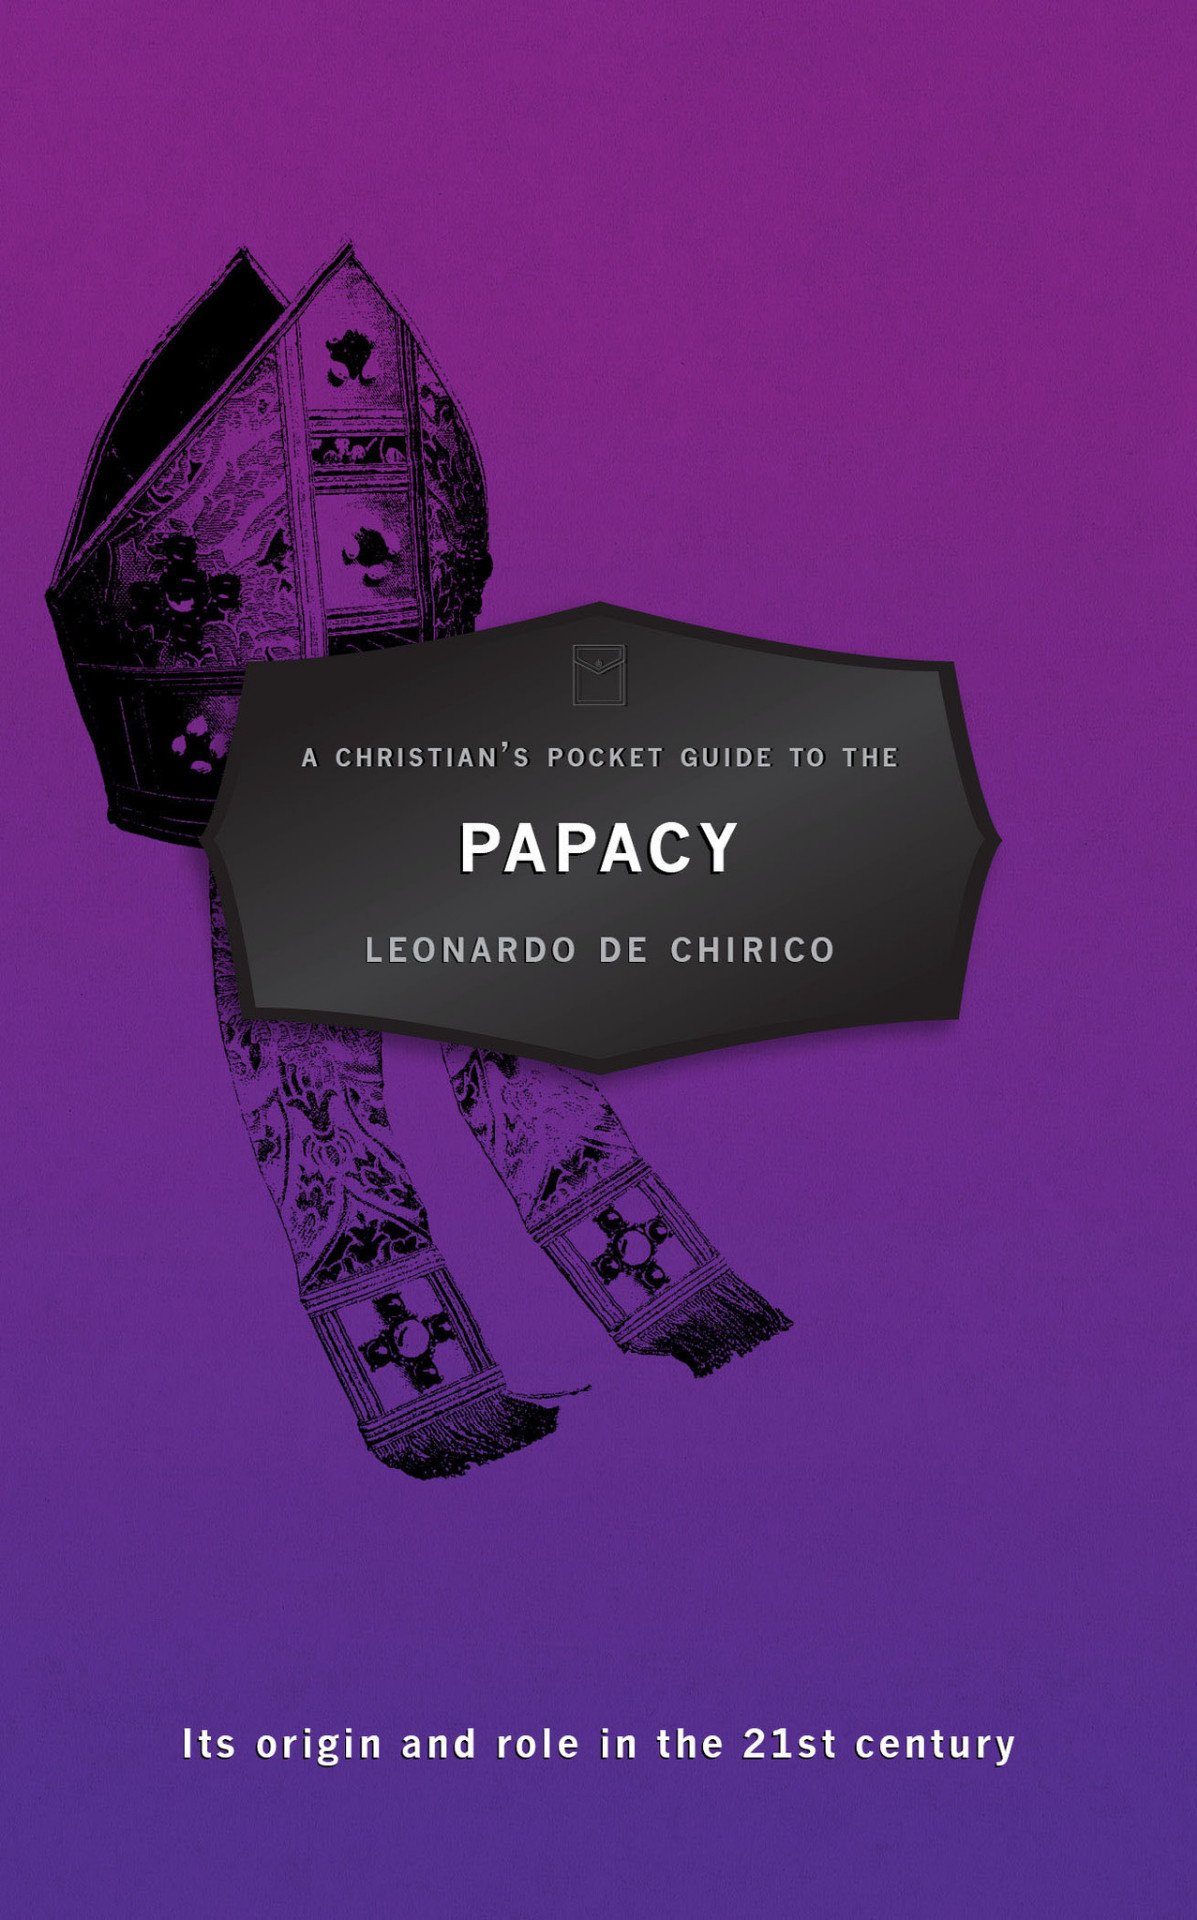 A Christian’s Pocket Guide to Papacy